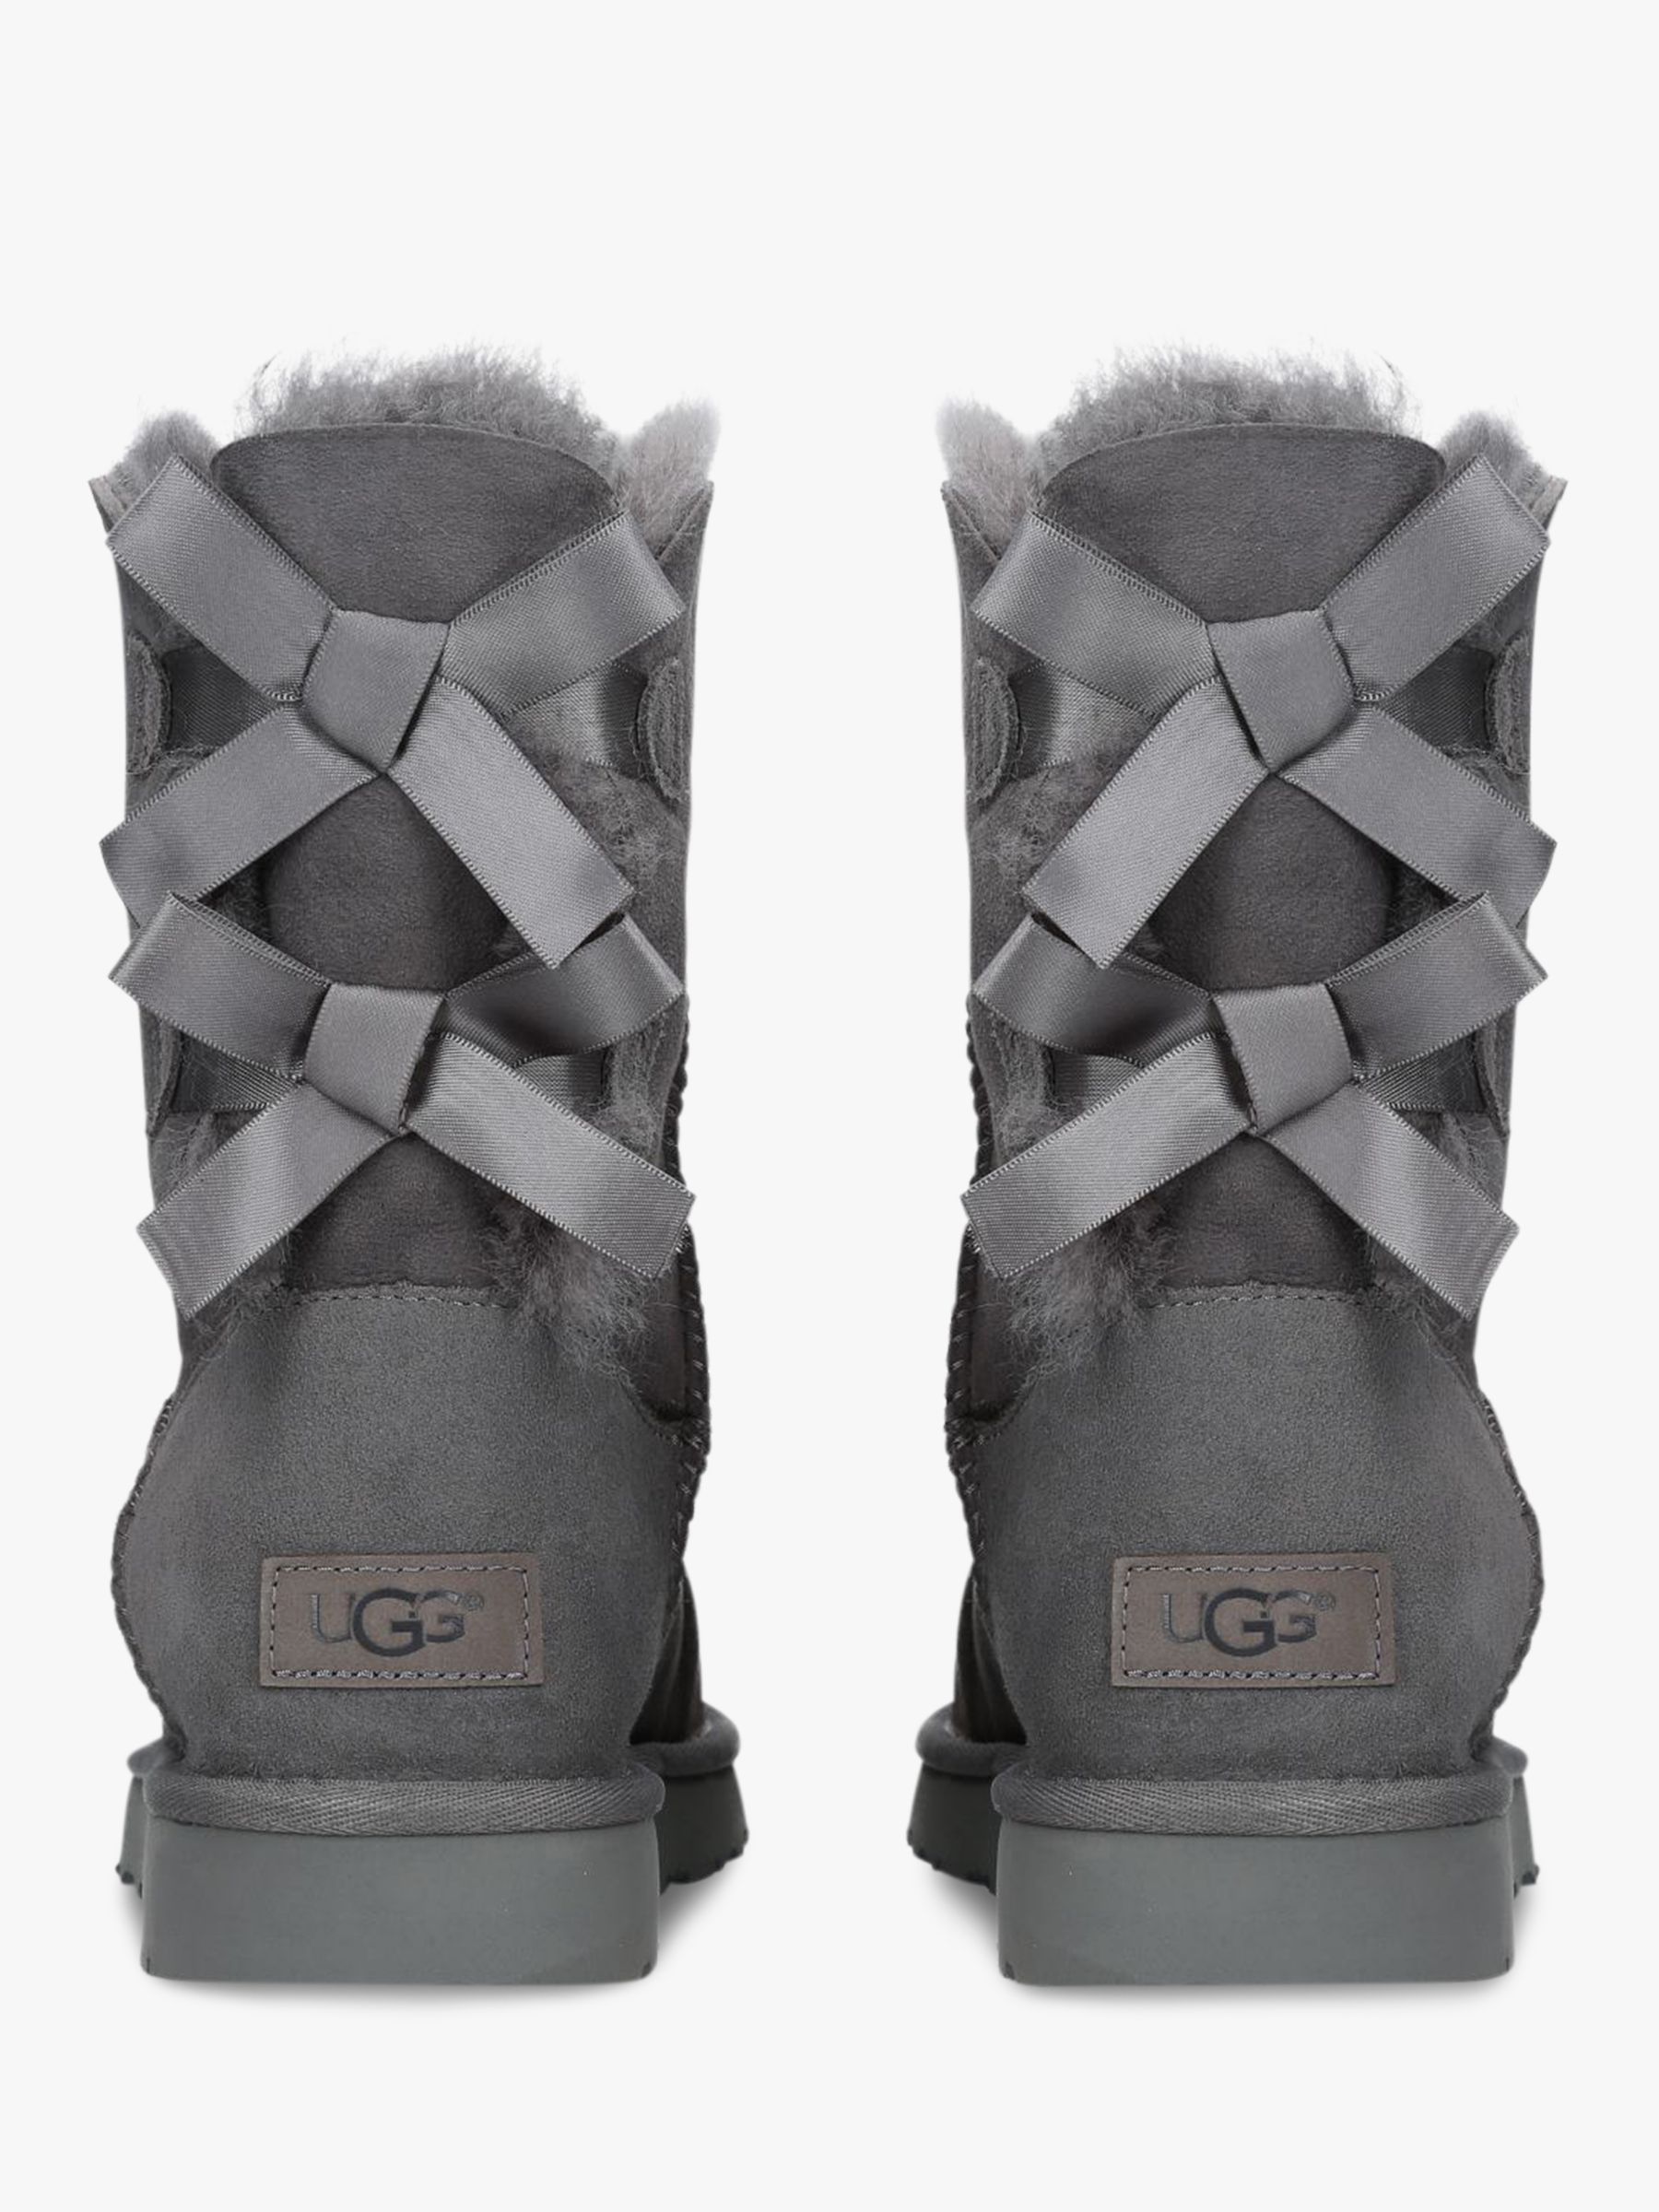 grey uggs with fur